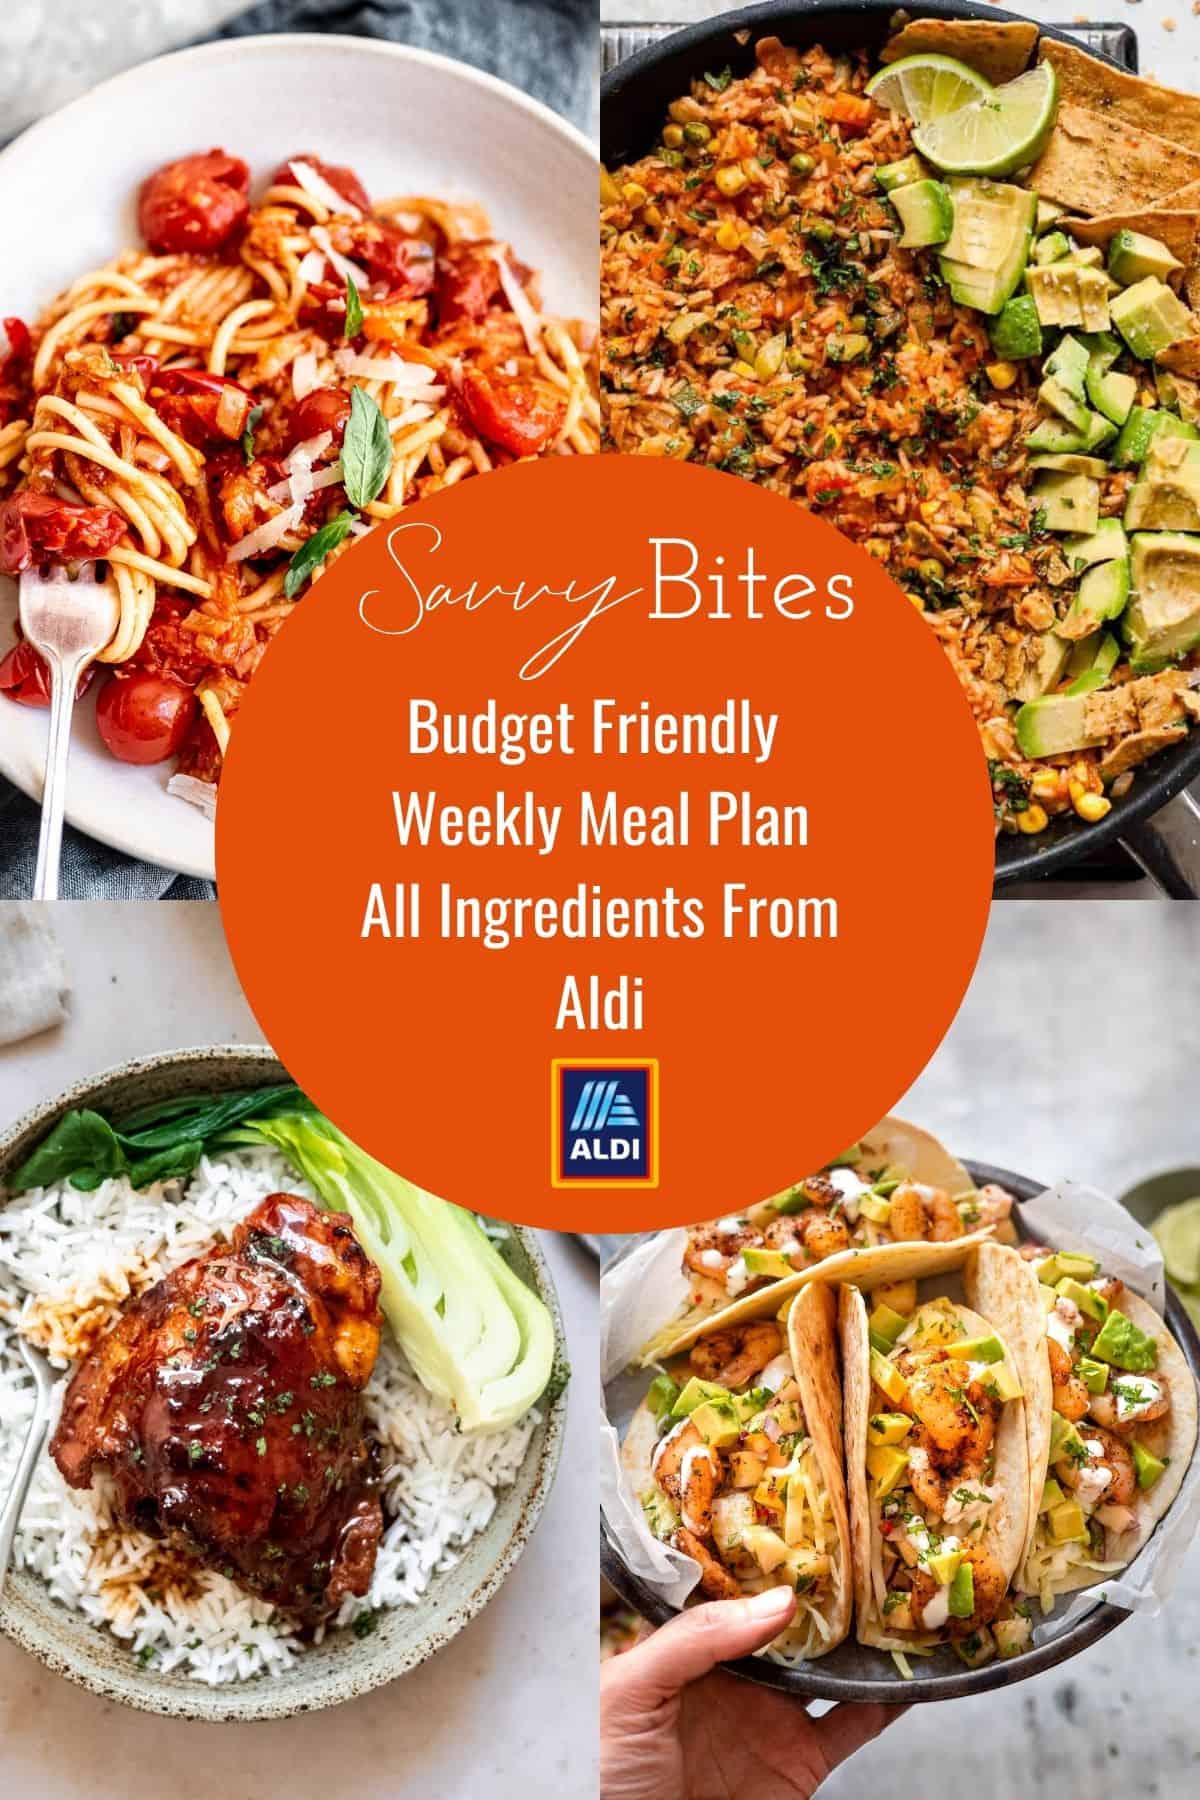 budget meal plan recipes in a photo collage